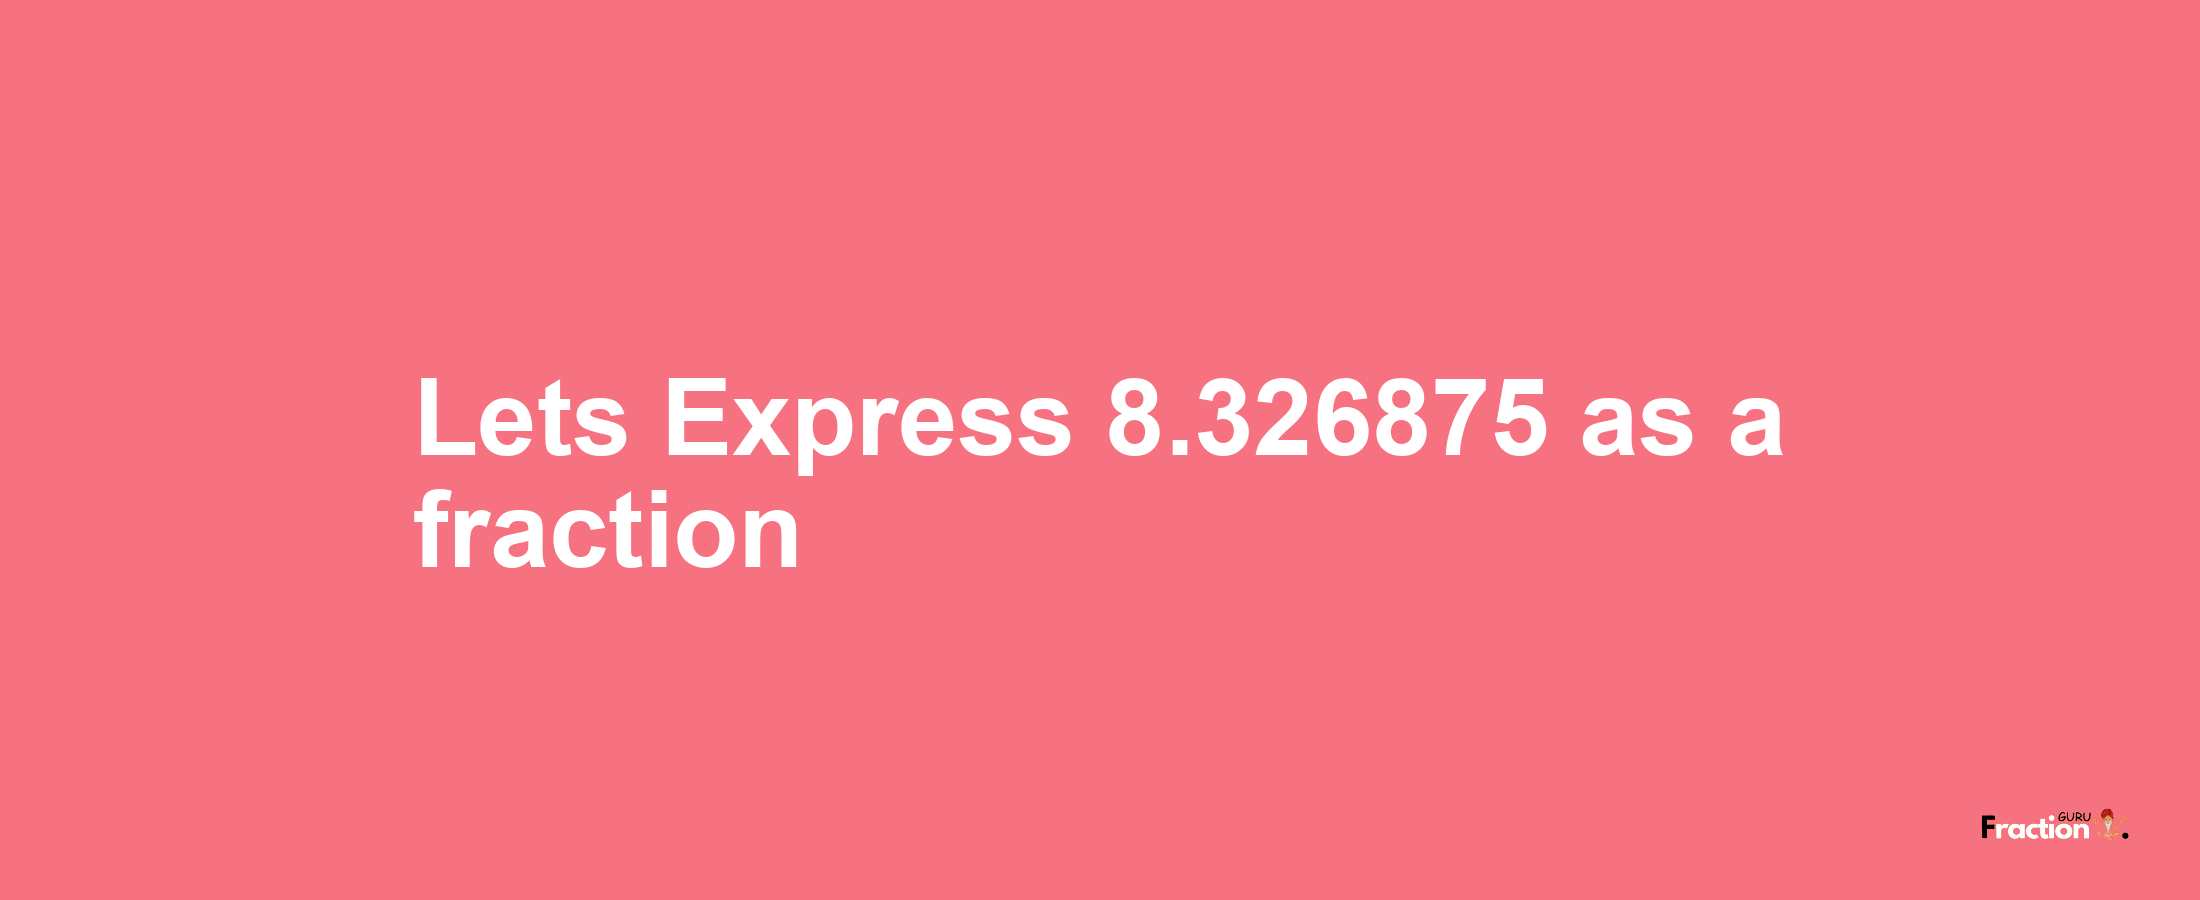 Lets Express 8.326875 as afraction